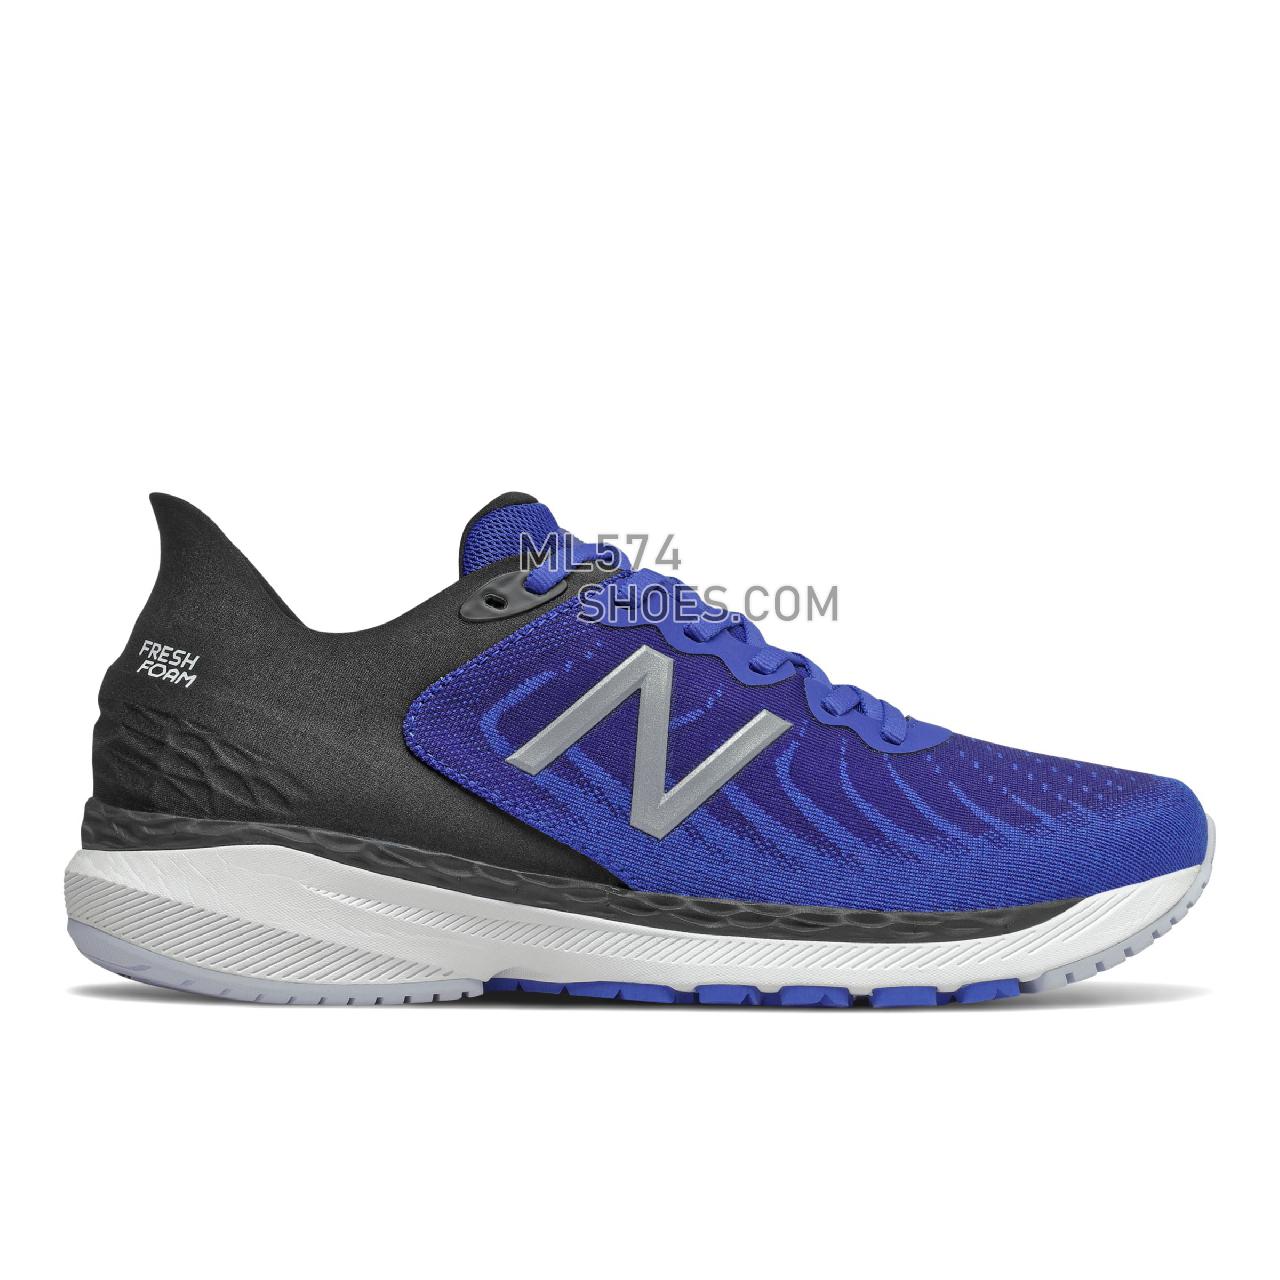 New Balance Fresh Foam 860v11 - Men's Stability Running - Team Royal with Black and Energy Lime - M860F11